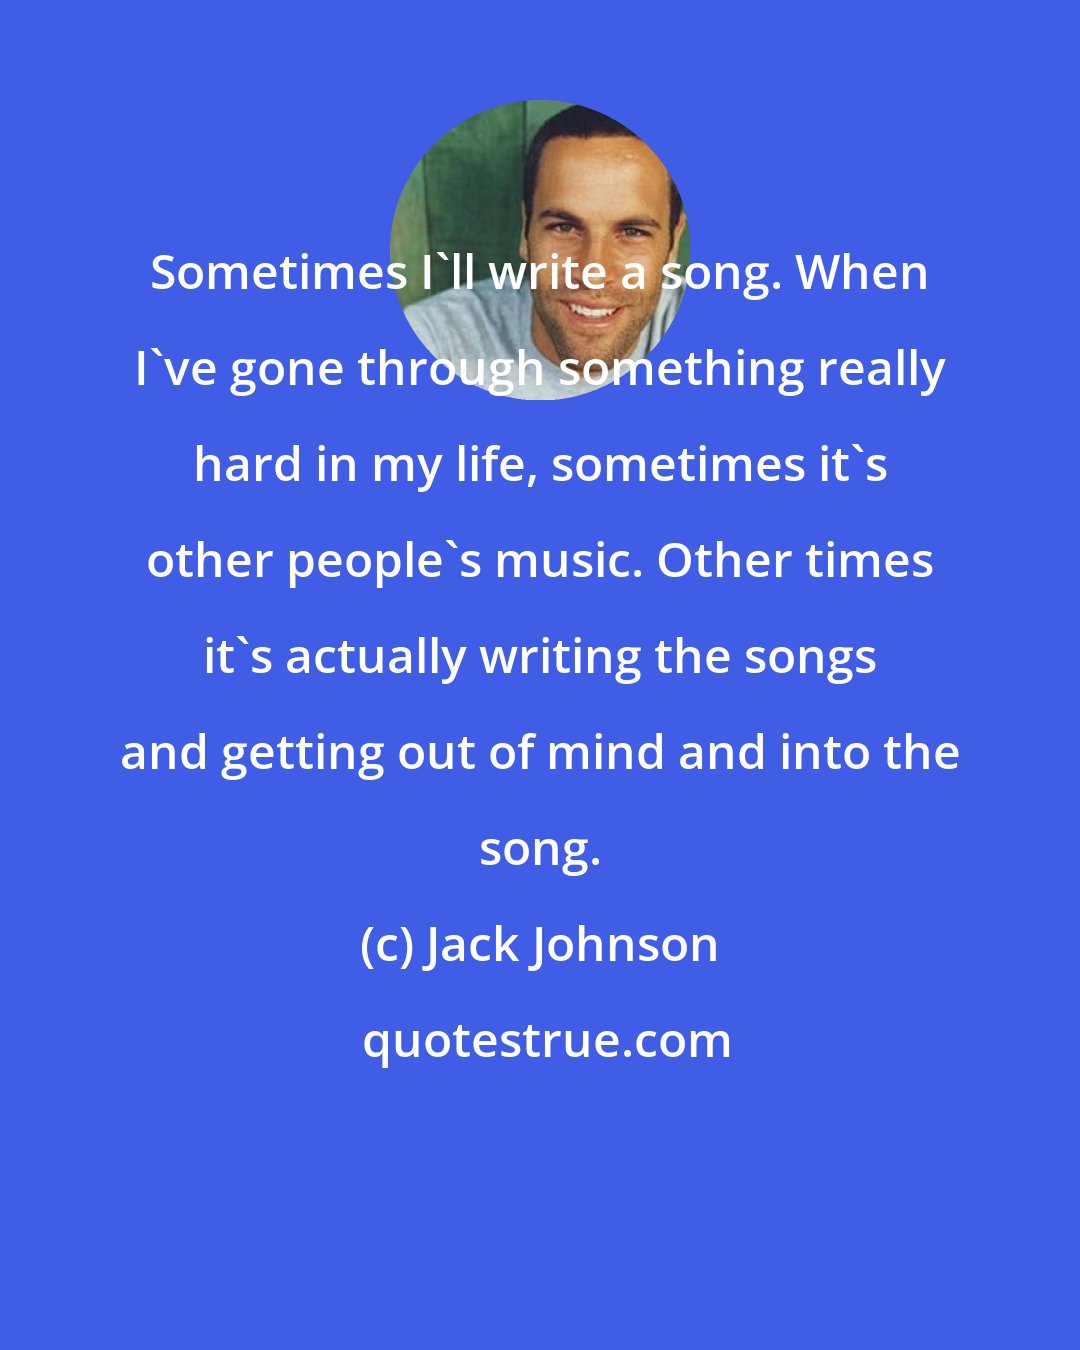 Jack Johnson: Sometimes I'll write a song. When I've gone through something really hard in my life, sometimes it's other people's music. Other times it's actually writing the songs and getting out of mind and into the song.